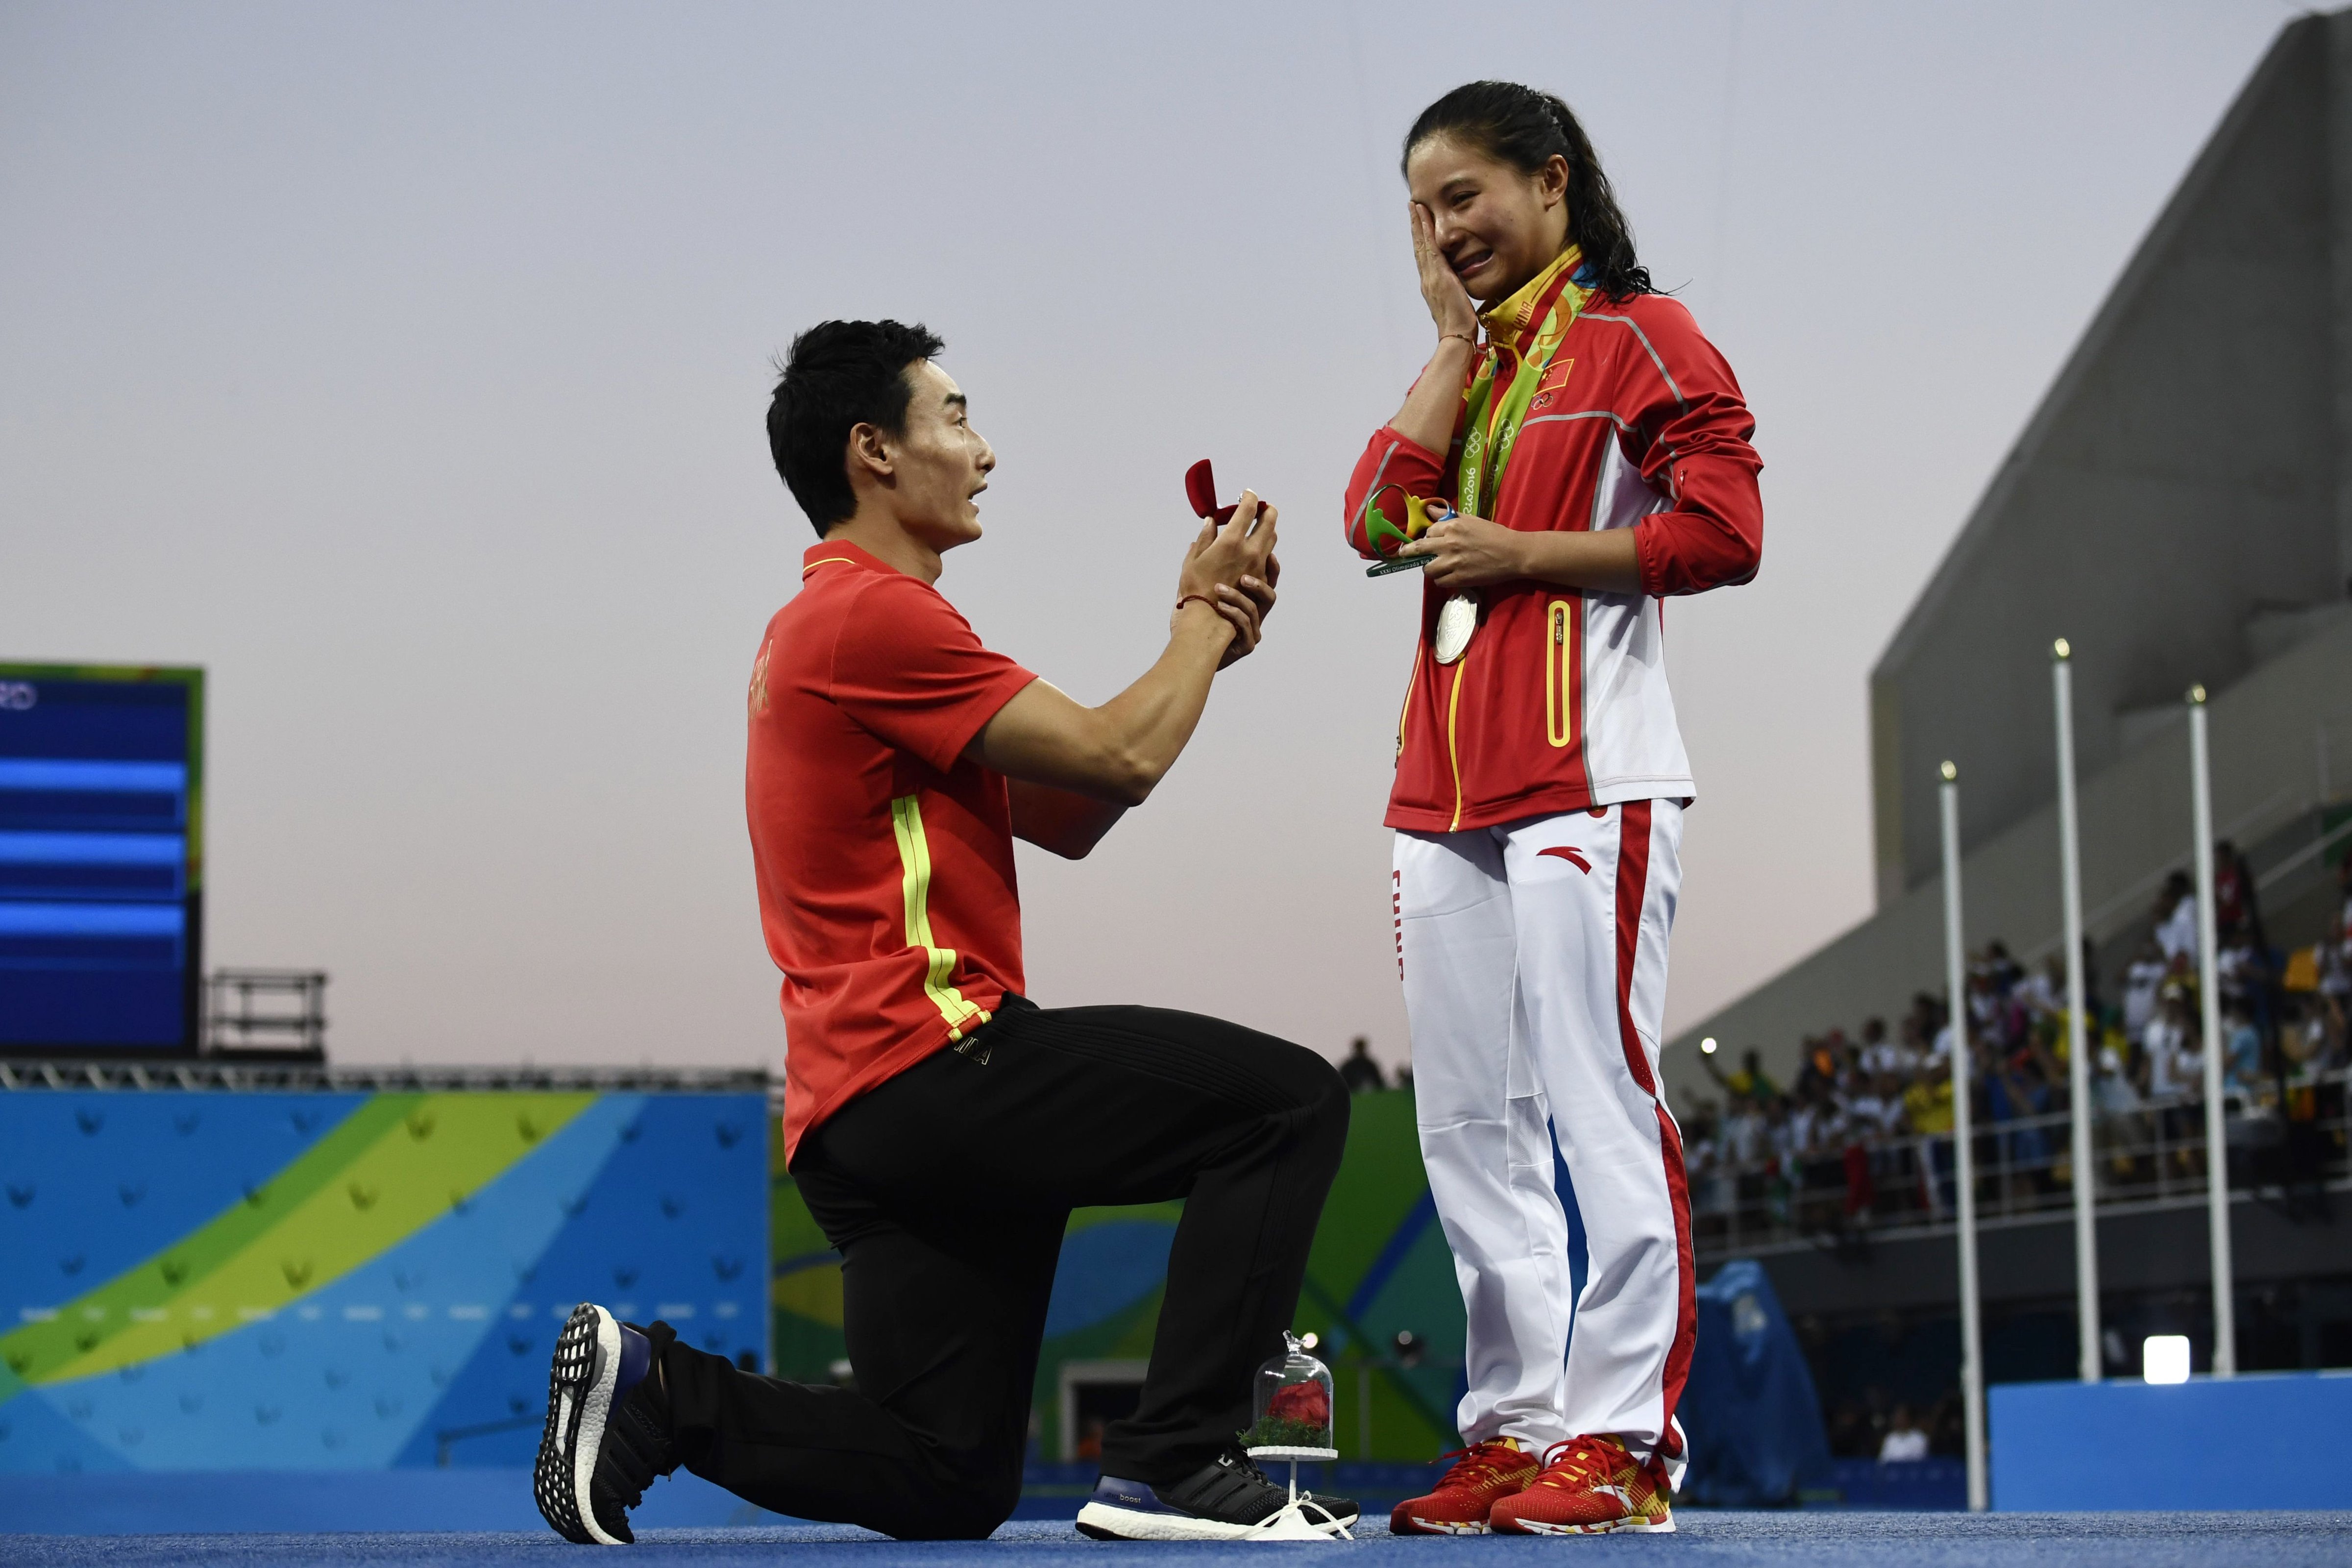 China's silver medalist He Zi, right, receives a marriage proposal from bronze medalist and fellow Chinese diver Qin Kai during the podium ceremony of the women's diving 3-m springboard final in Rio de Jainero on Aug. 14, 2016 (Christophe Simon—AFP/Getty Images)